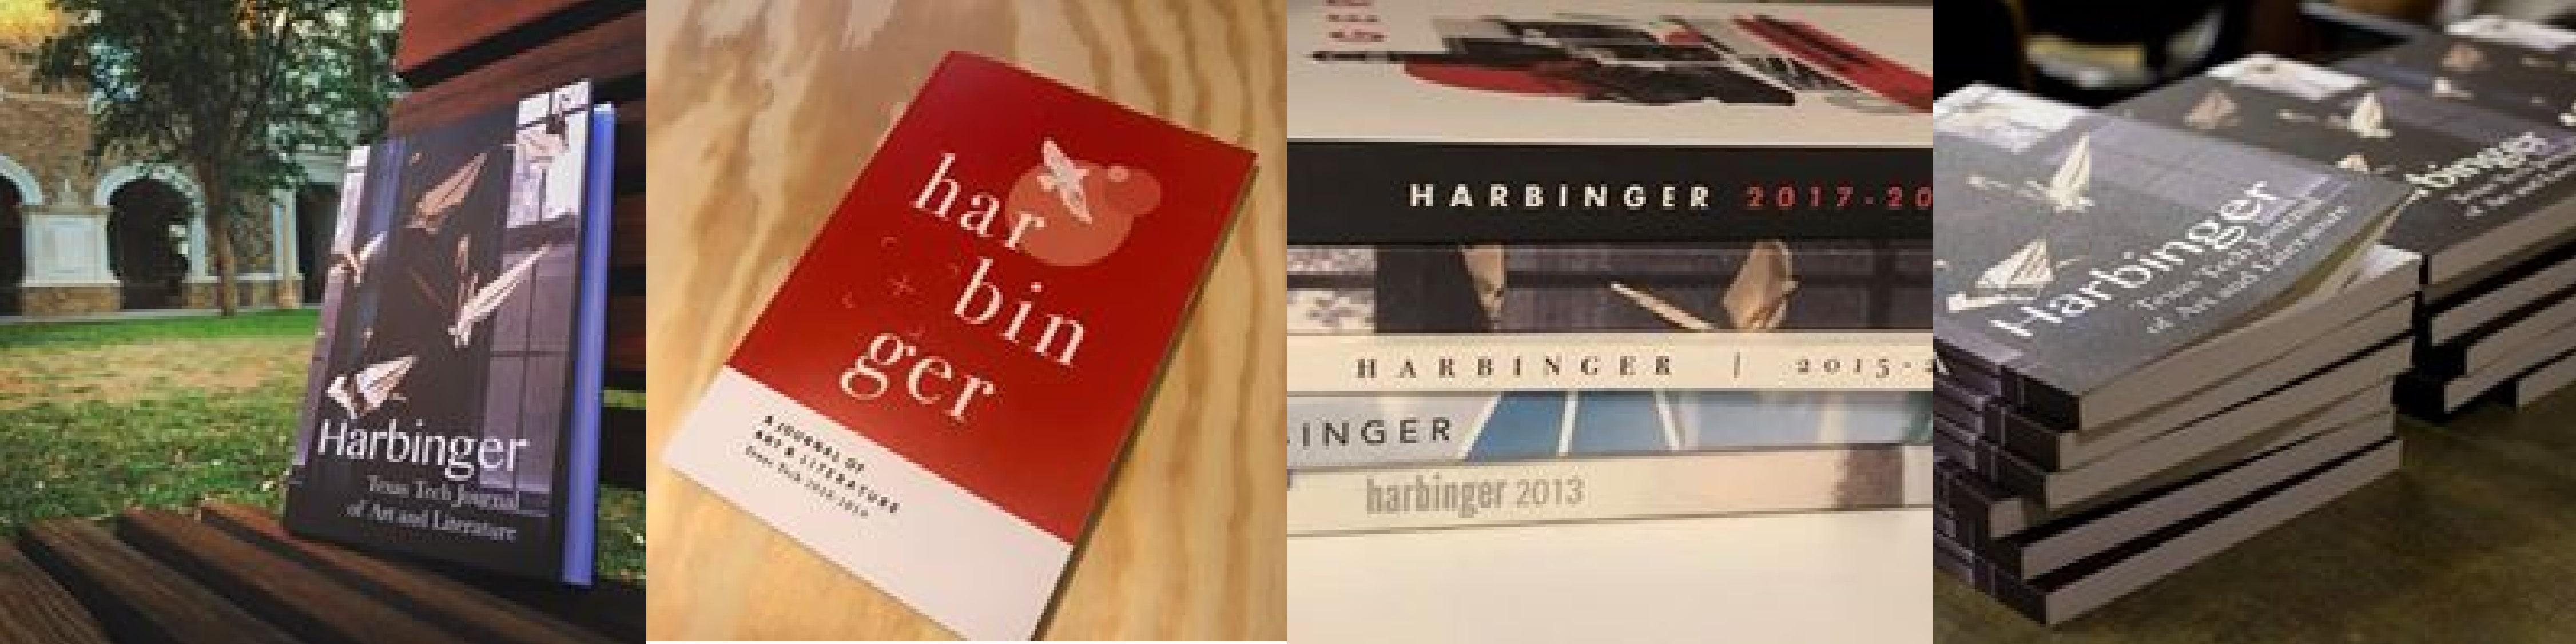 Covers of past Harbinger magazines